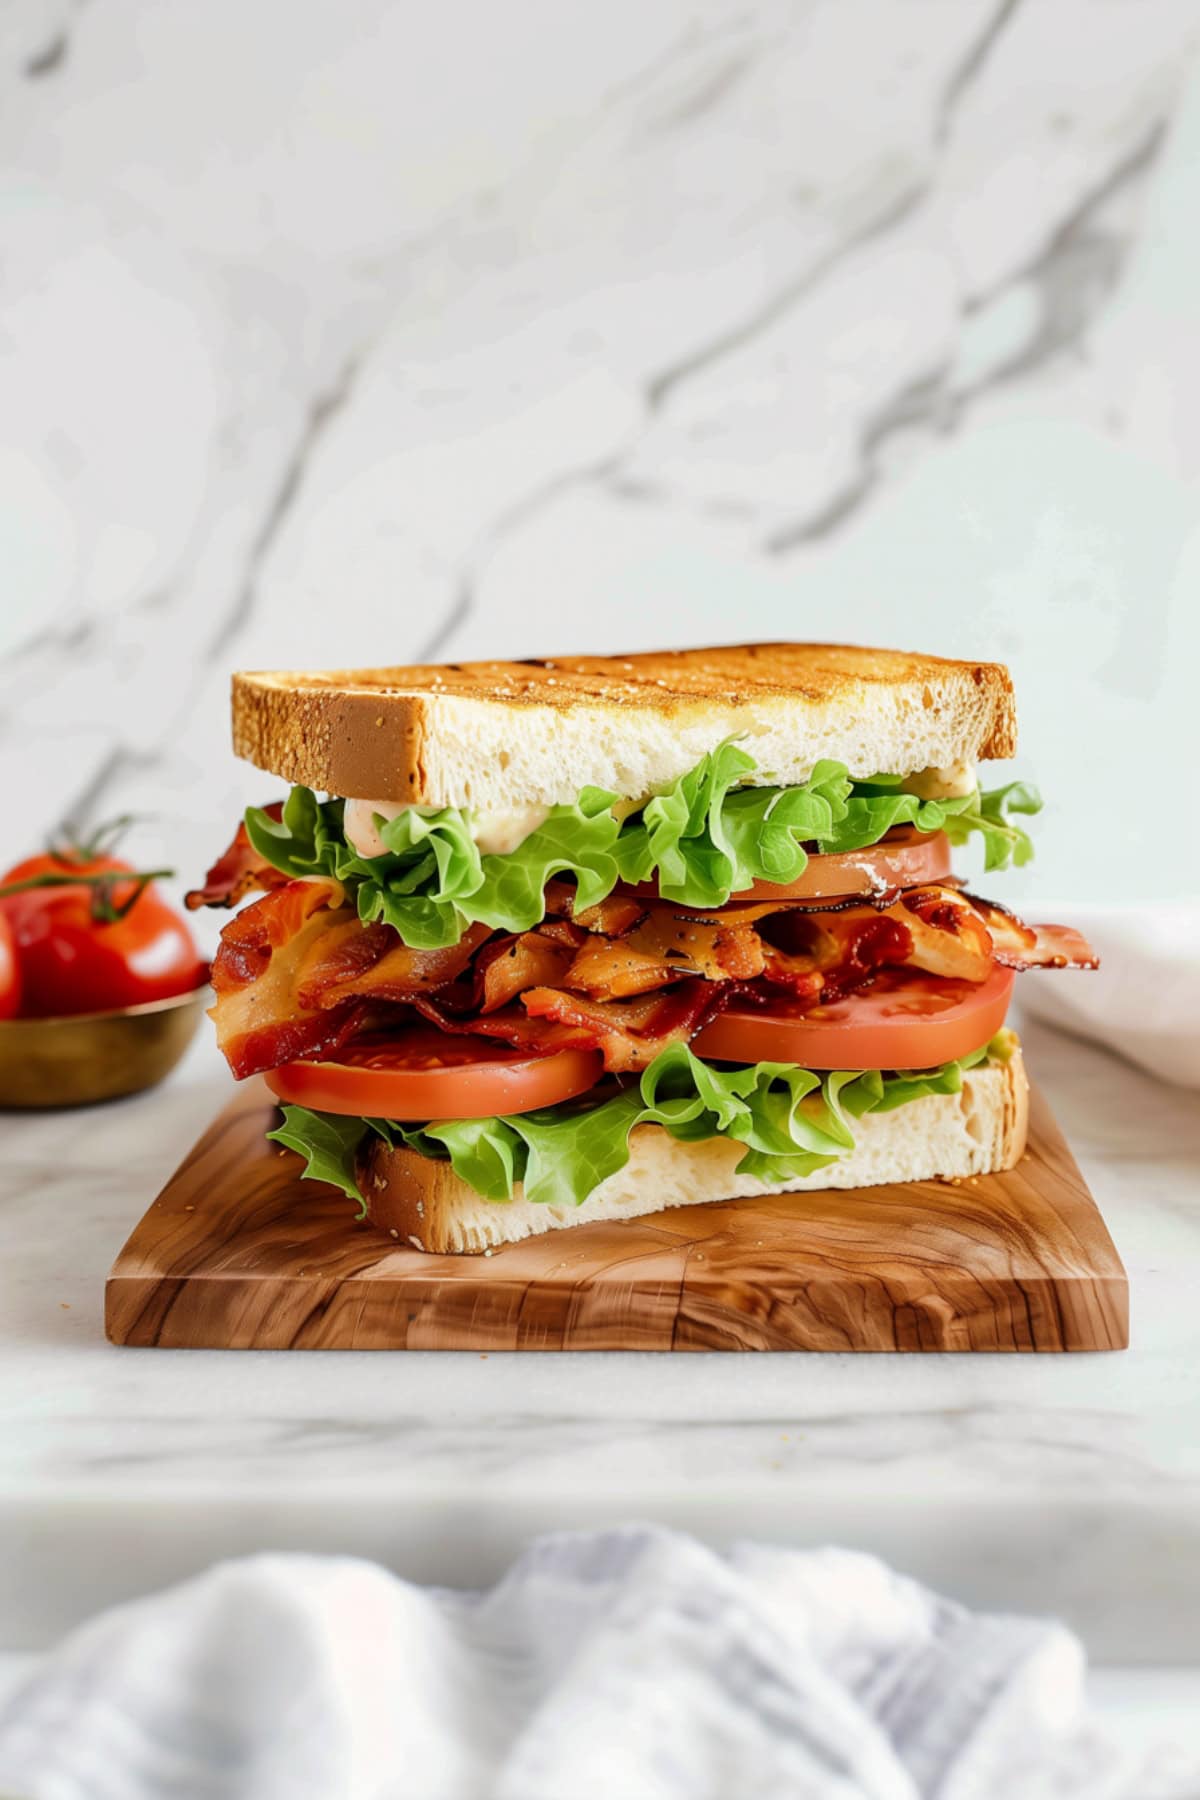 BLT Sandwich with lettuce, heirloom tomatoes and bacon on a wooden board.